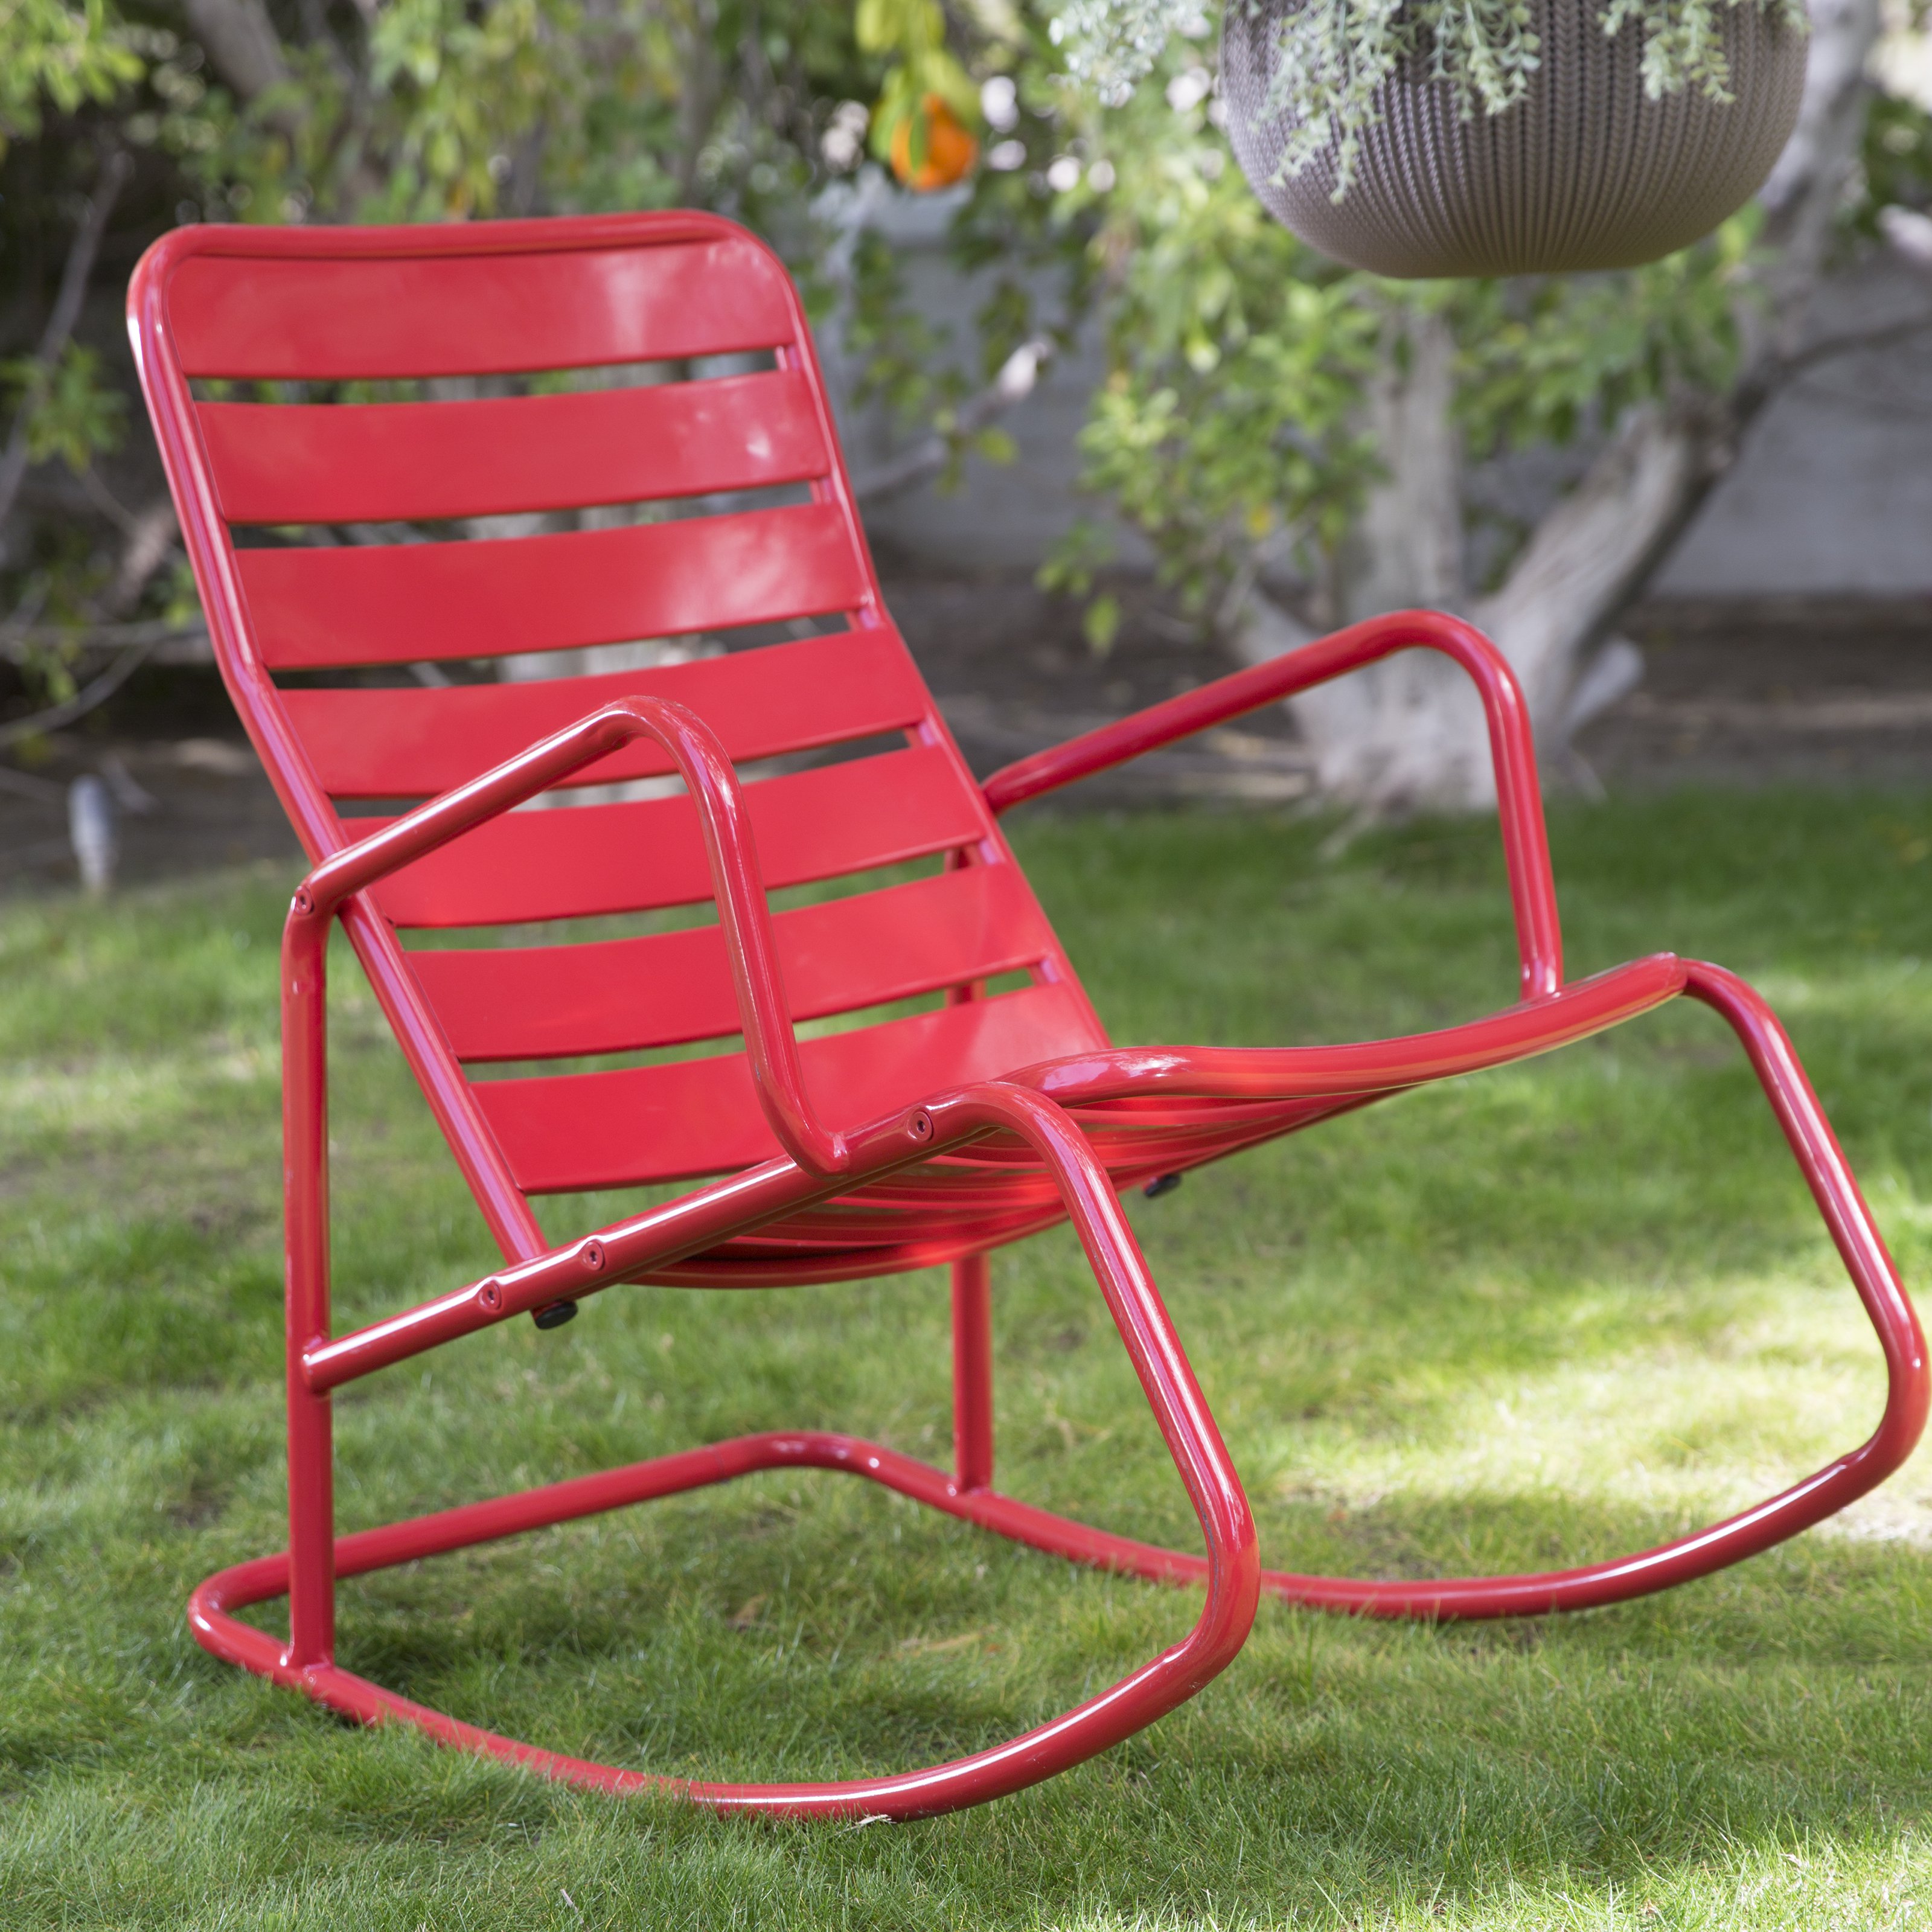 Trending Belham Living Adley Outdoor Metal Rocking Chair Set with Side Table - outdoor metal rocking chairs